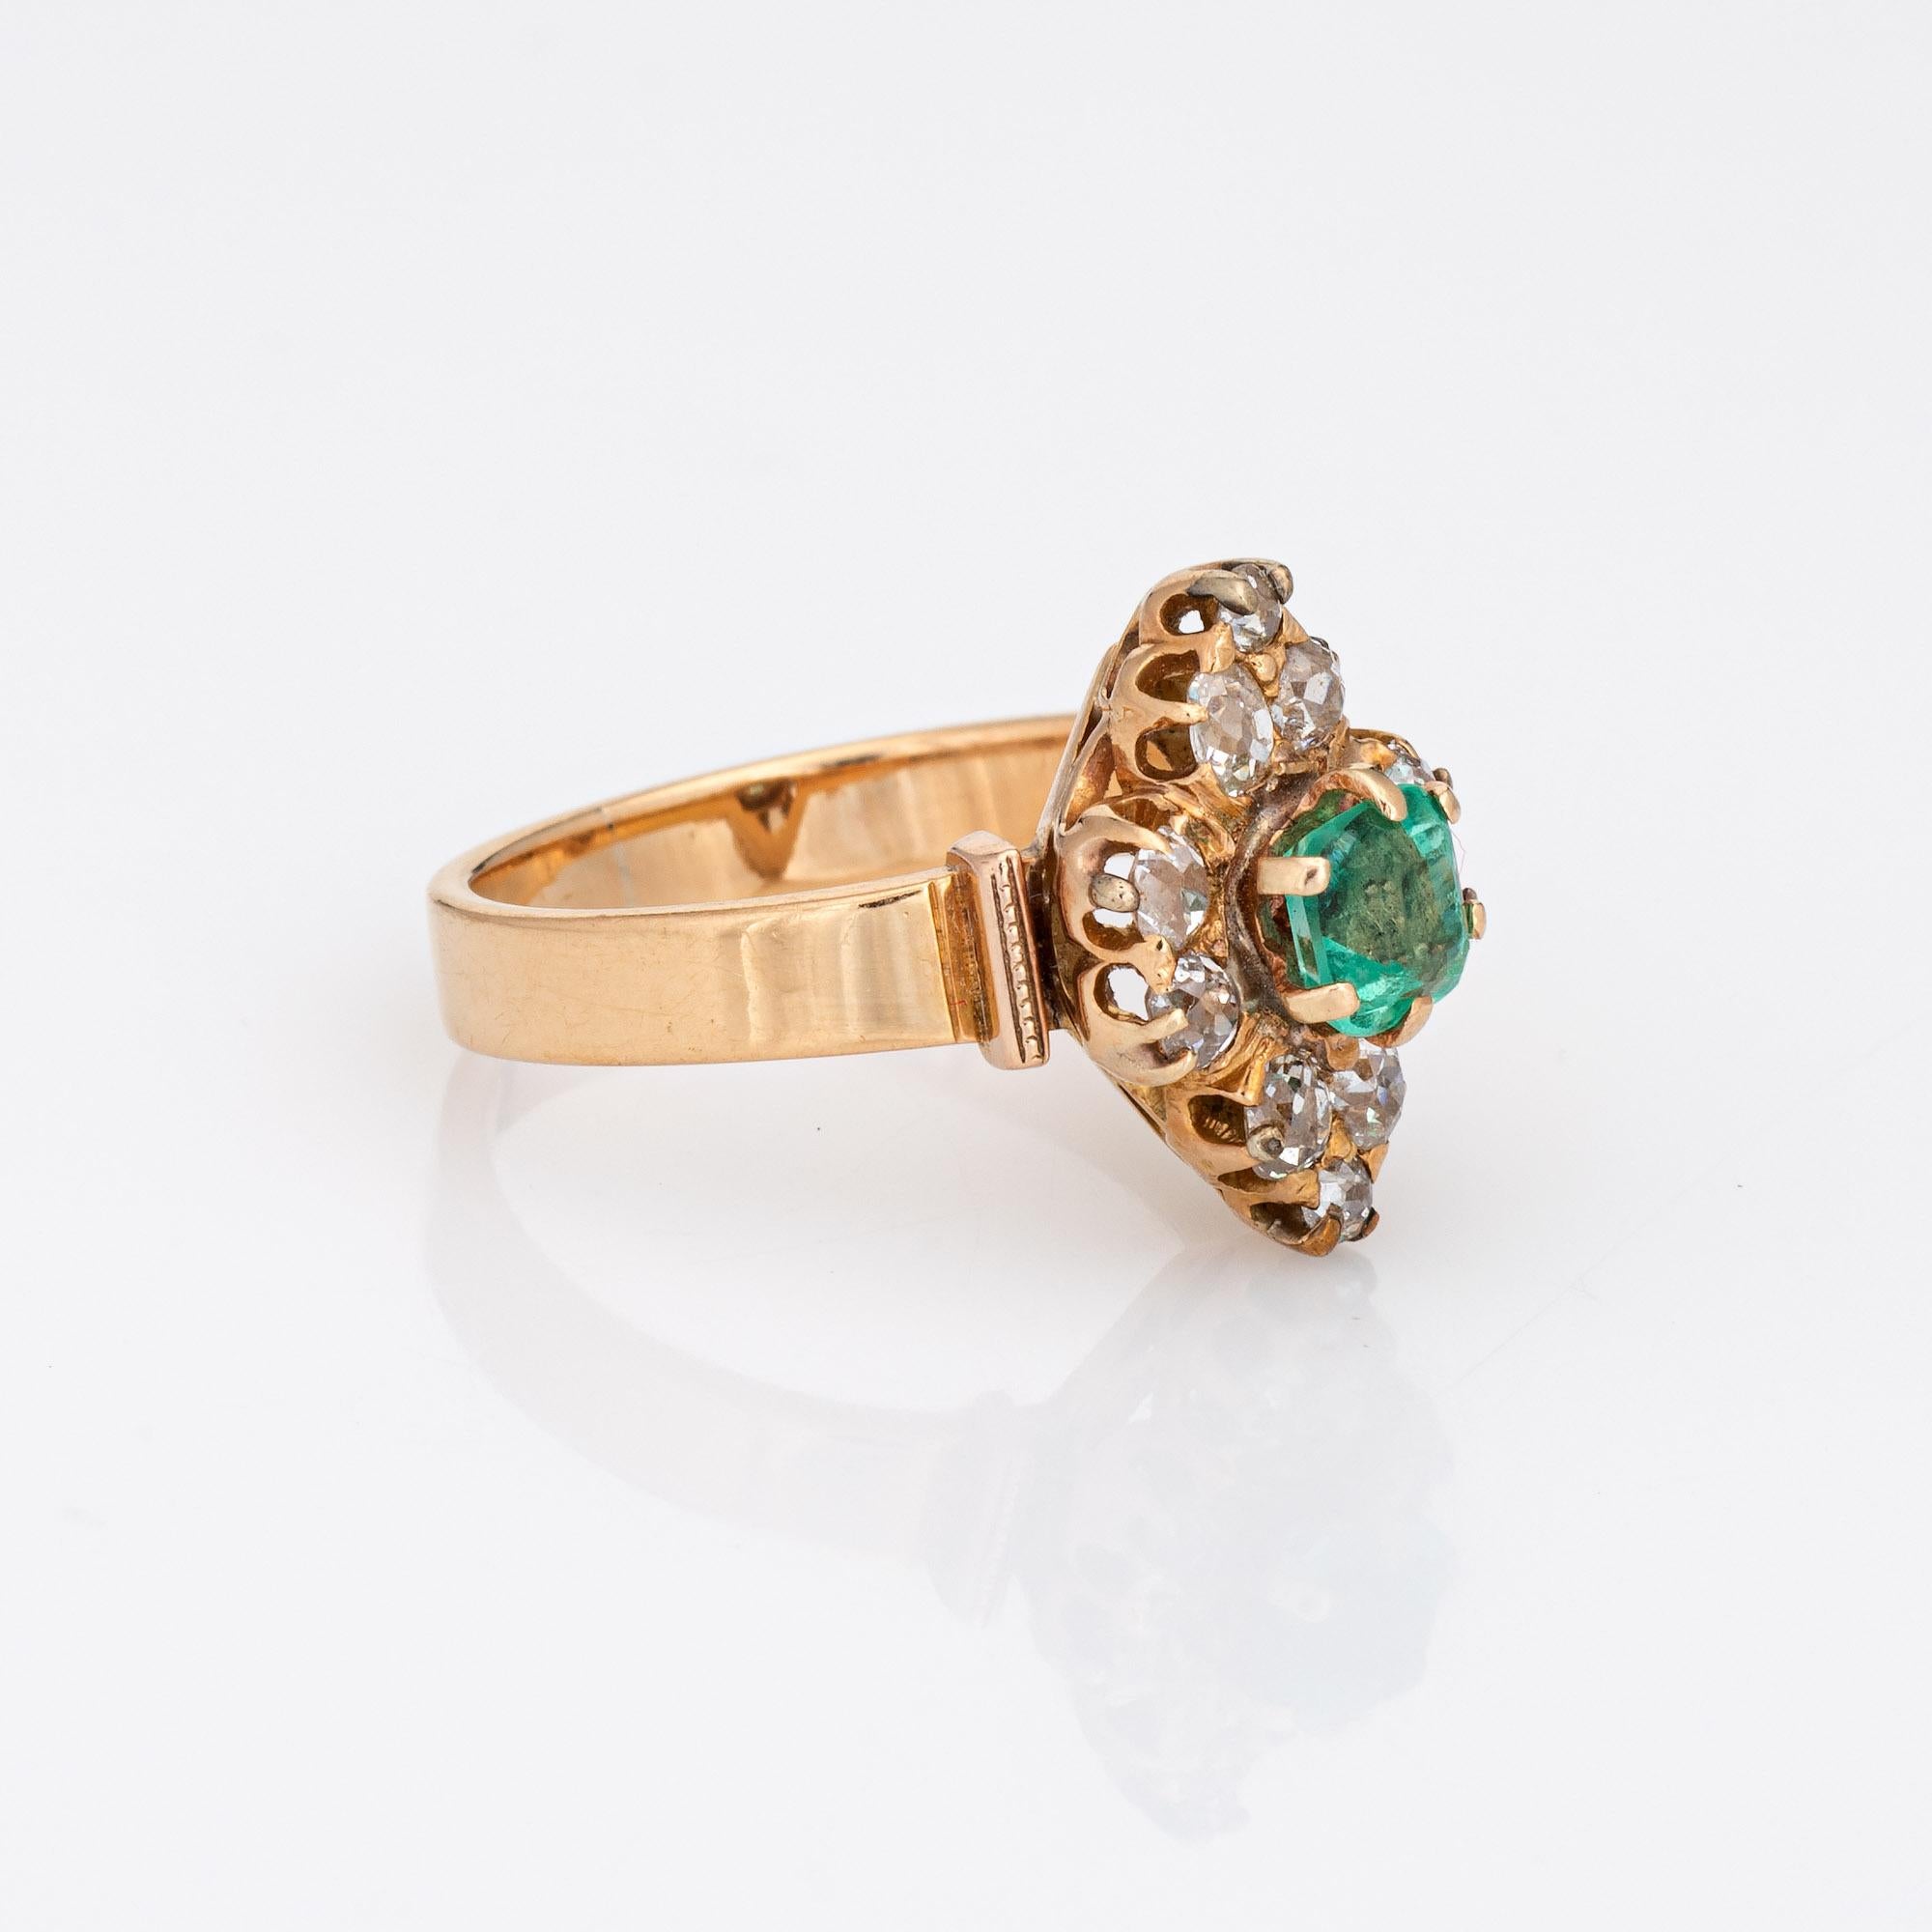 Cushion Cut Antique Victorian Emerald Diamond Ring 18k Yellow Gold Vintage Fine Jewelry 5.5 For Sale